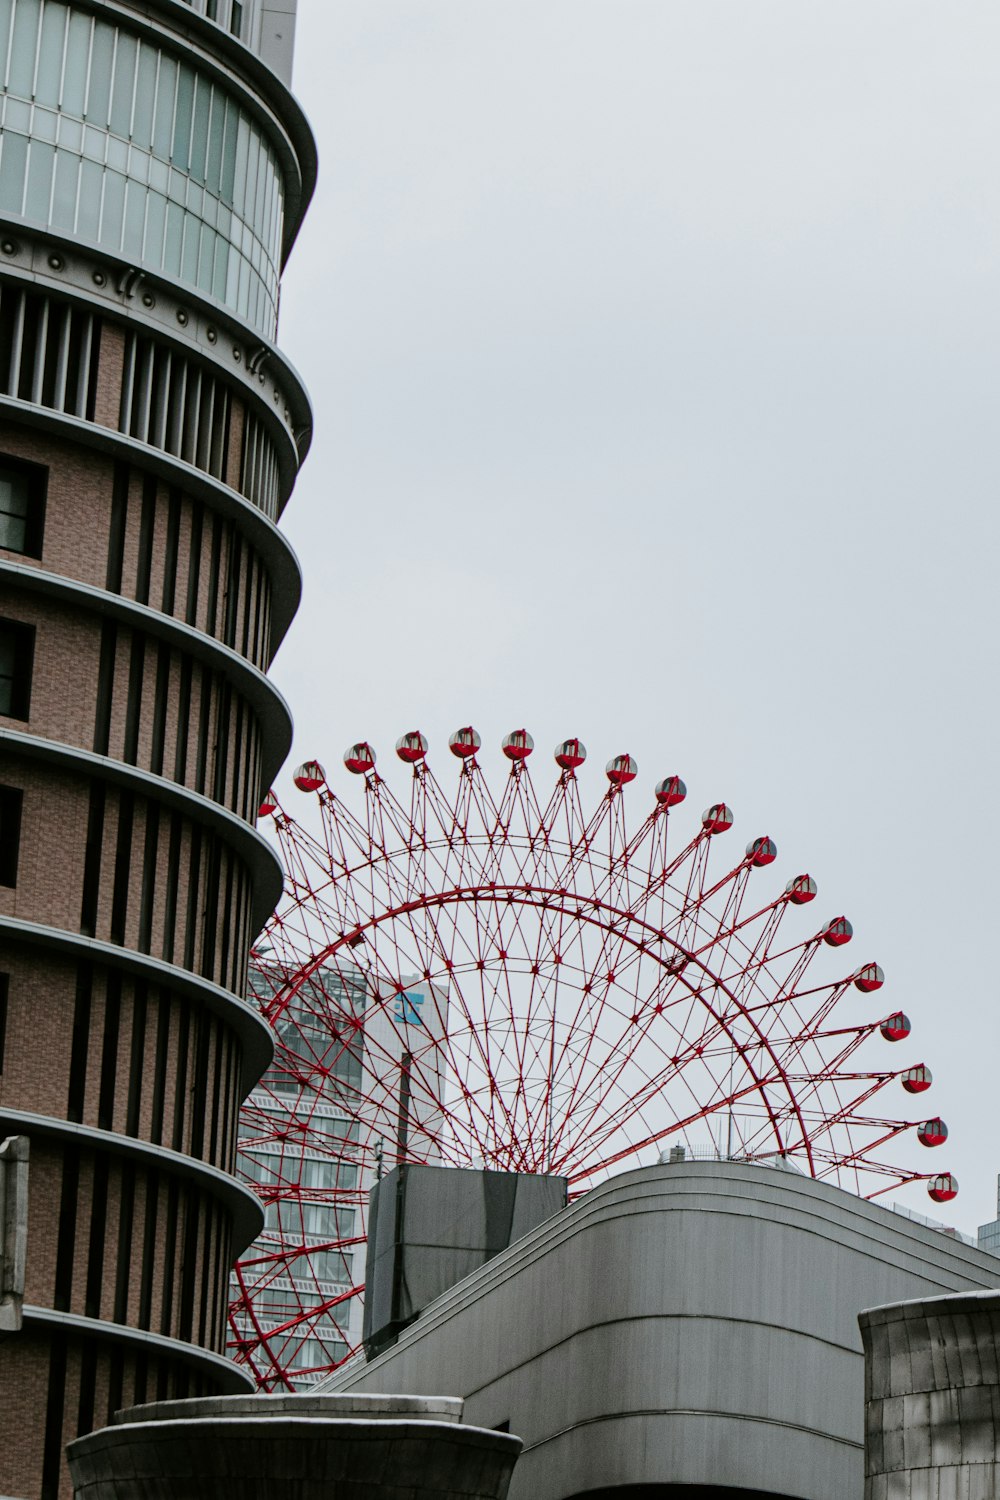 building and Ferris wheel under gray sky